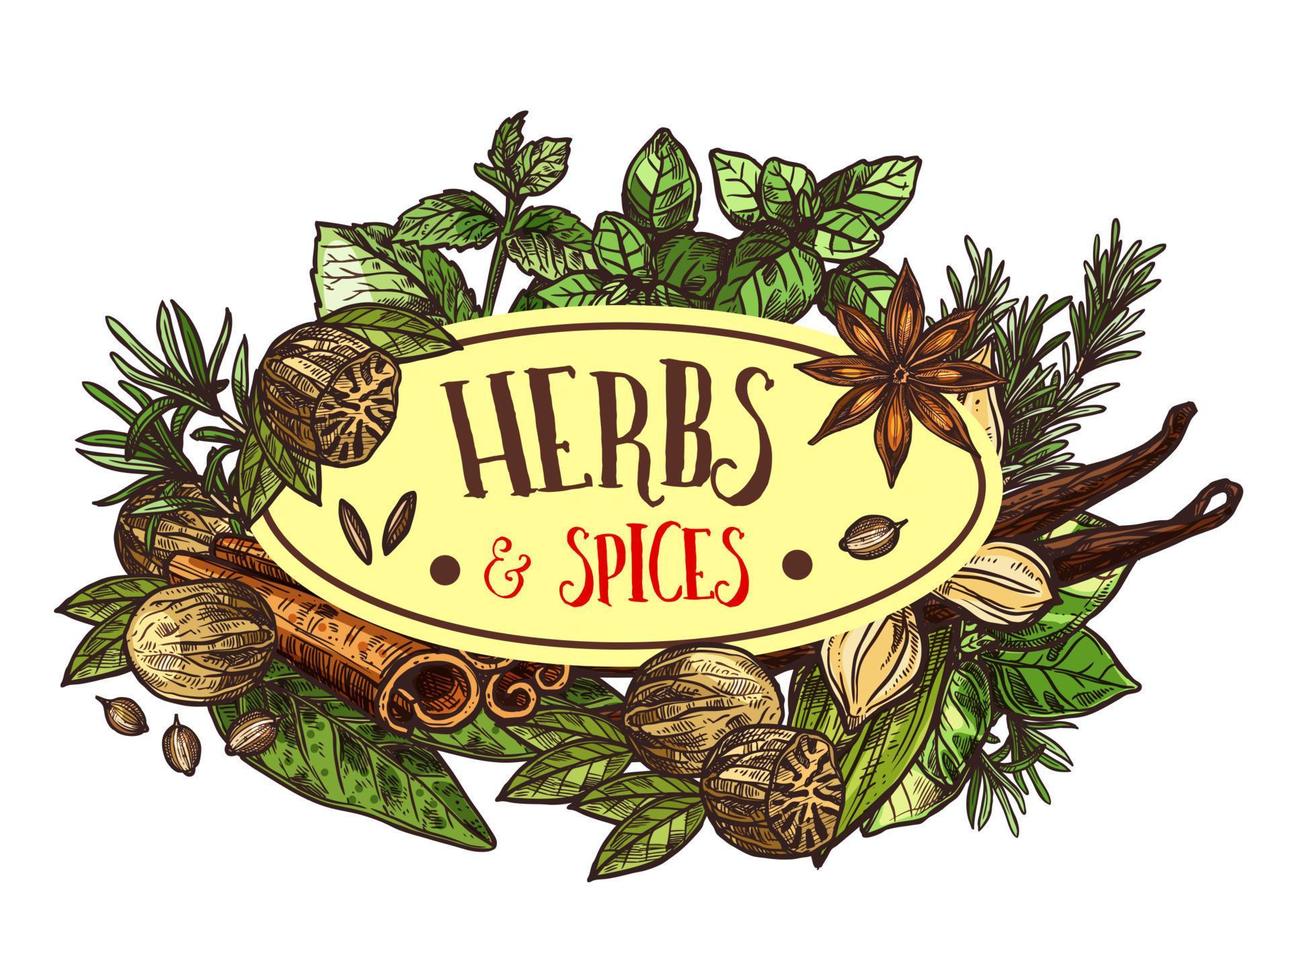 Herbs and spices icon with condiments around sign vector